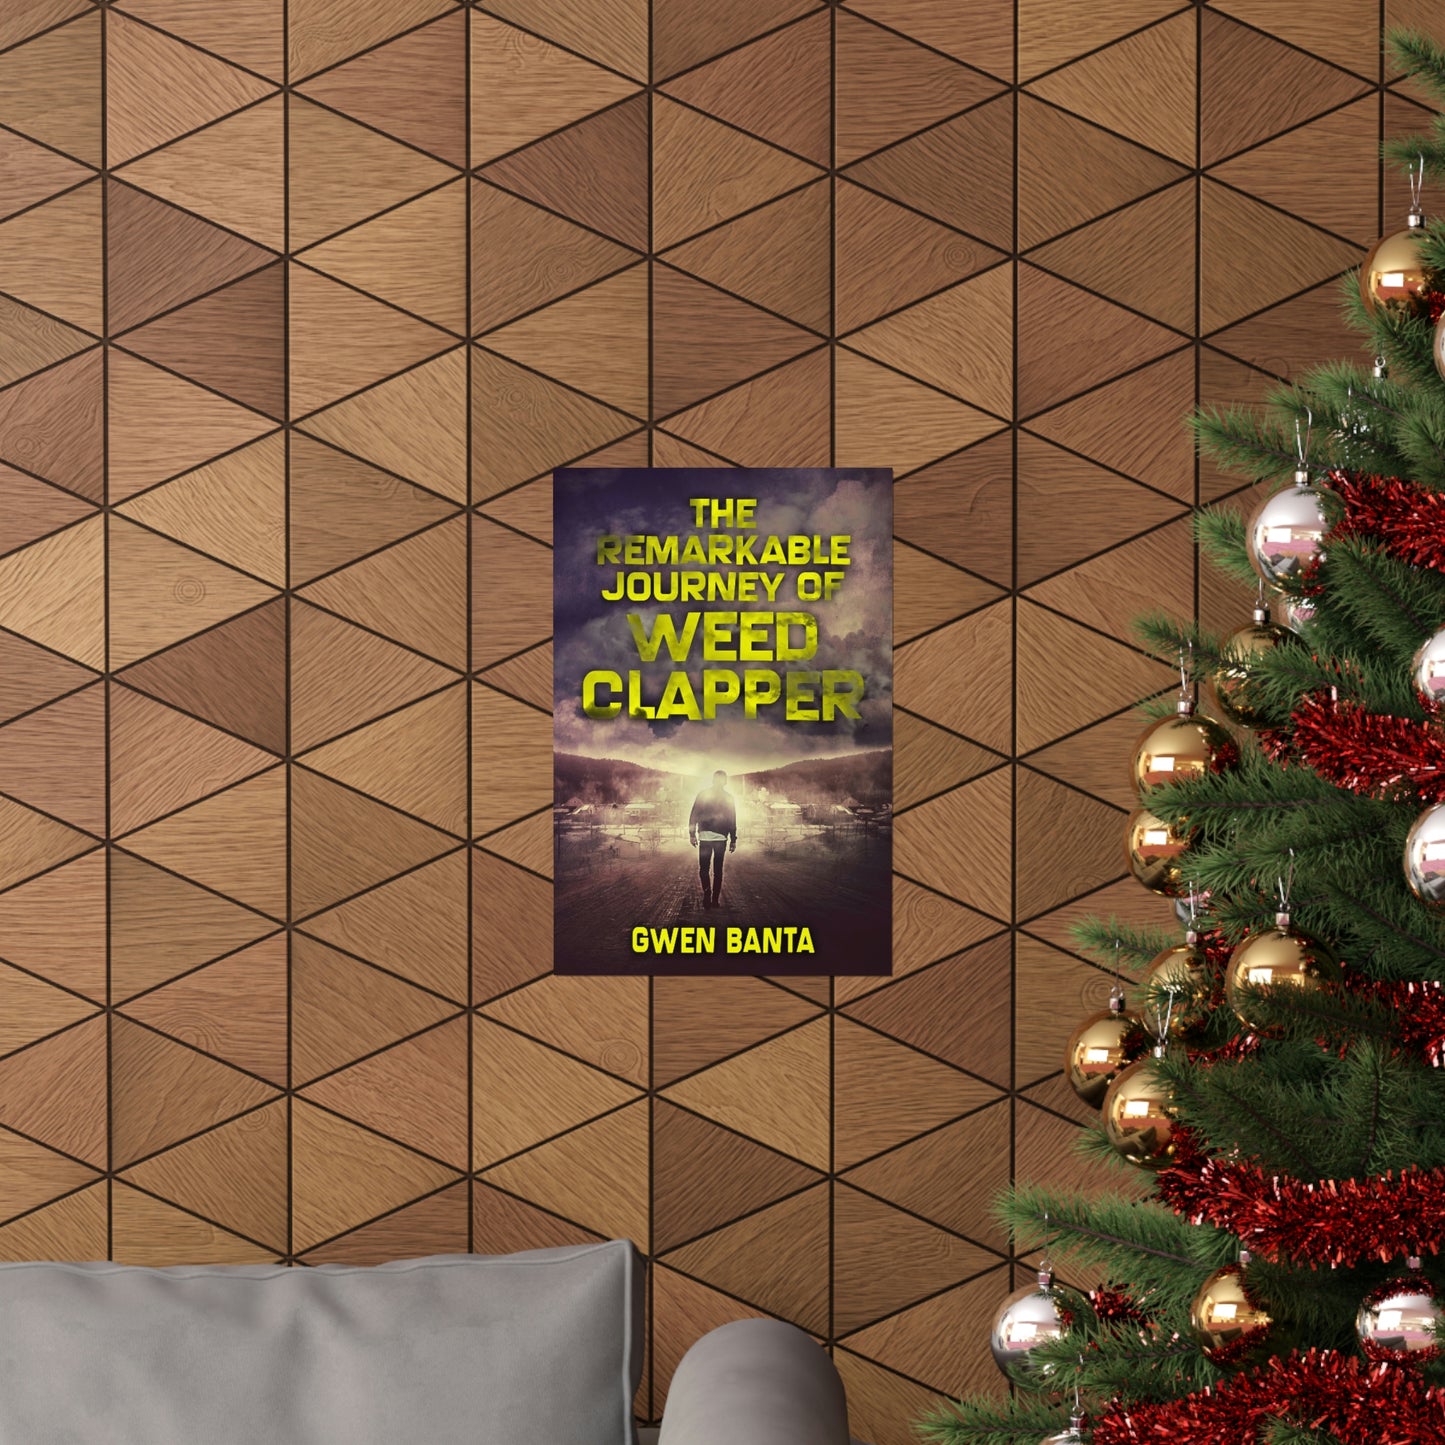 The Remarkable Journey Of Weed Clapper - Matte Poster